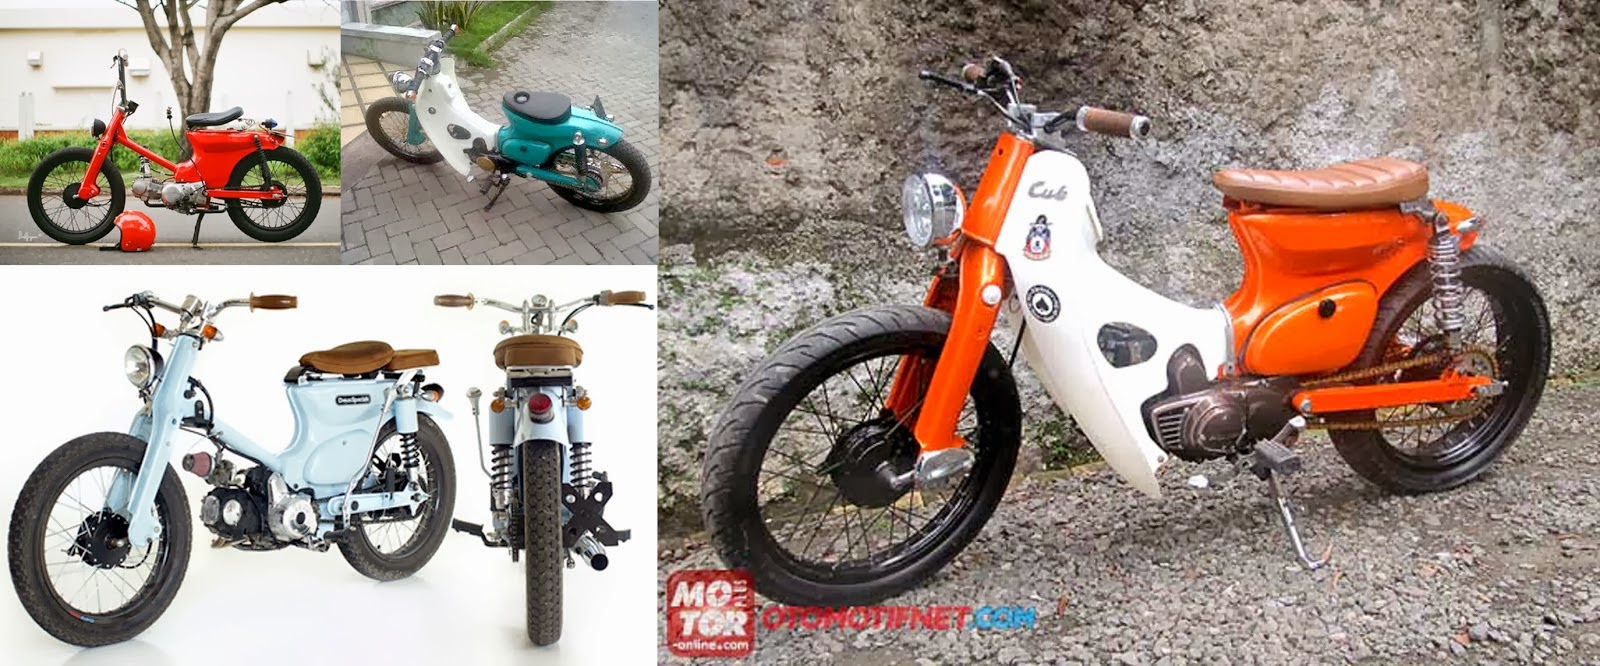 Download Image Modifikasi Motor Astrea Gren Pc Android Iphone And